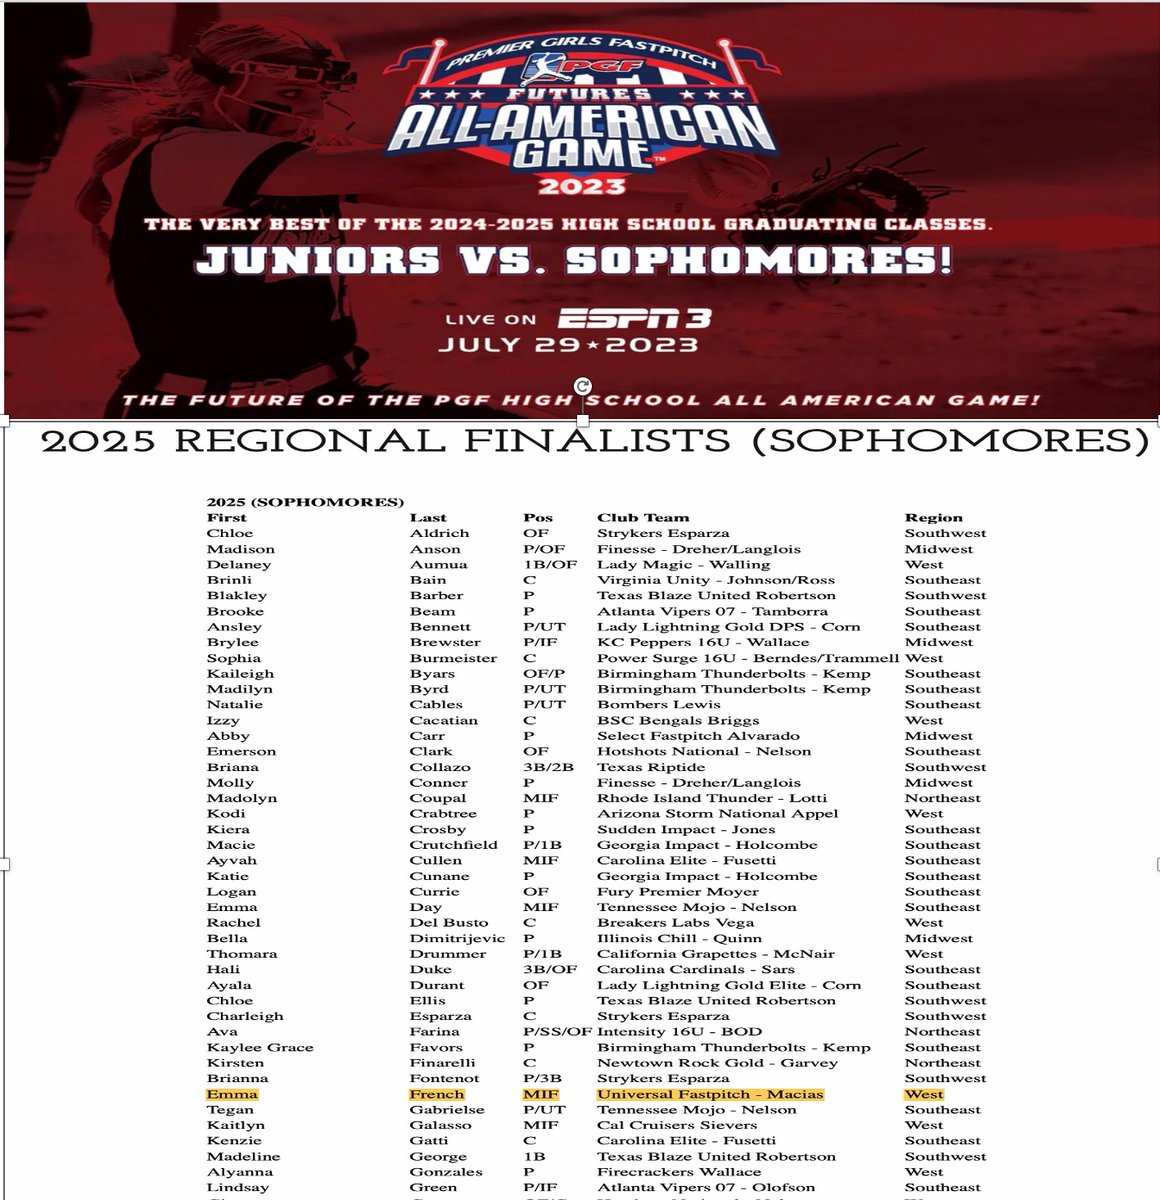 Congratulations Emma on making the PGF 2025 Regional Finalists (Sophomores). Down to the final 32 in the West Region! Honor to be named with that talented group. Keep working hard! @westcoastpreps_ @UniversalMacias @BeniciaHighBHS 
pgfallamerican.com/futures-region…